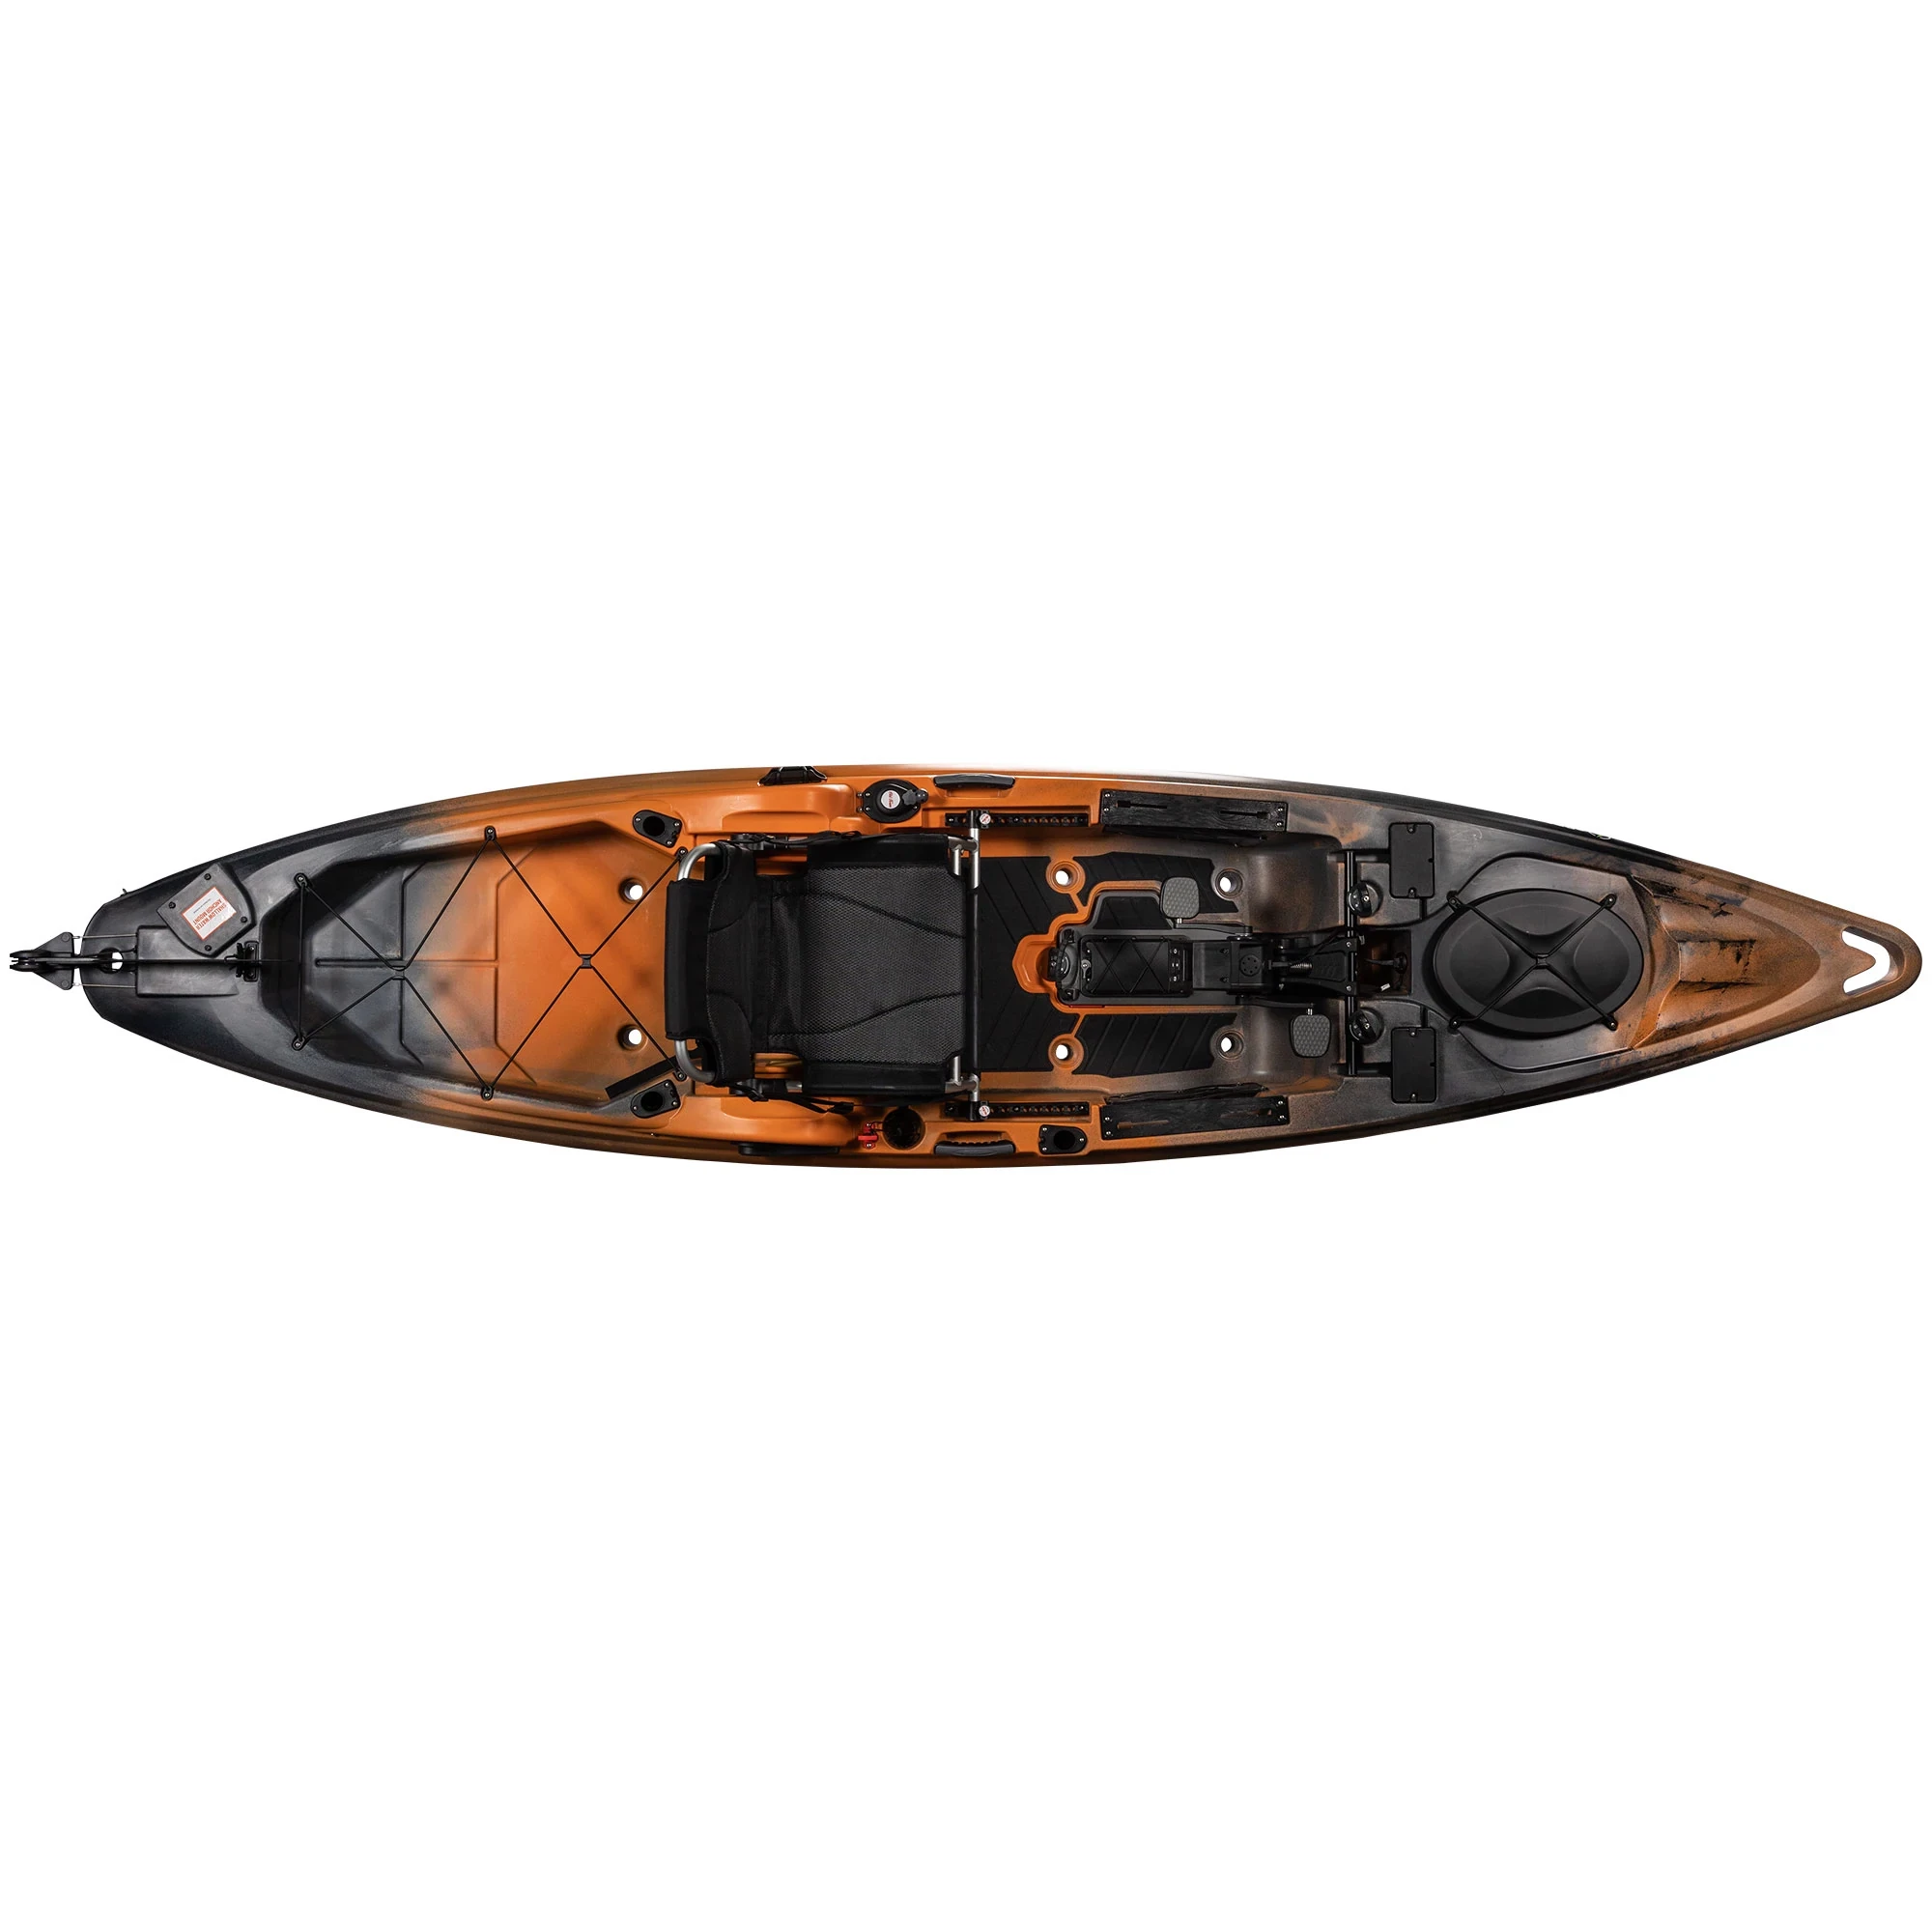 Top Down View of Sportsman BigWater ePDL+ 132 - Ember Camo